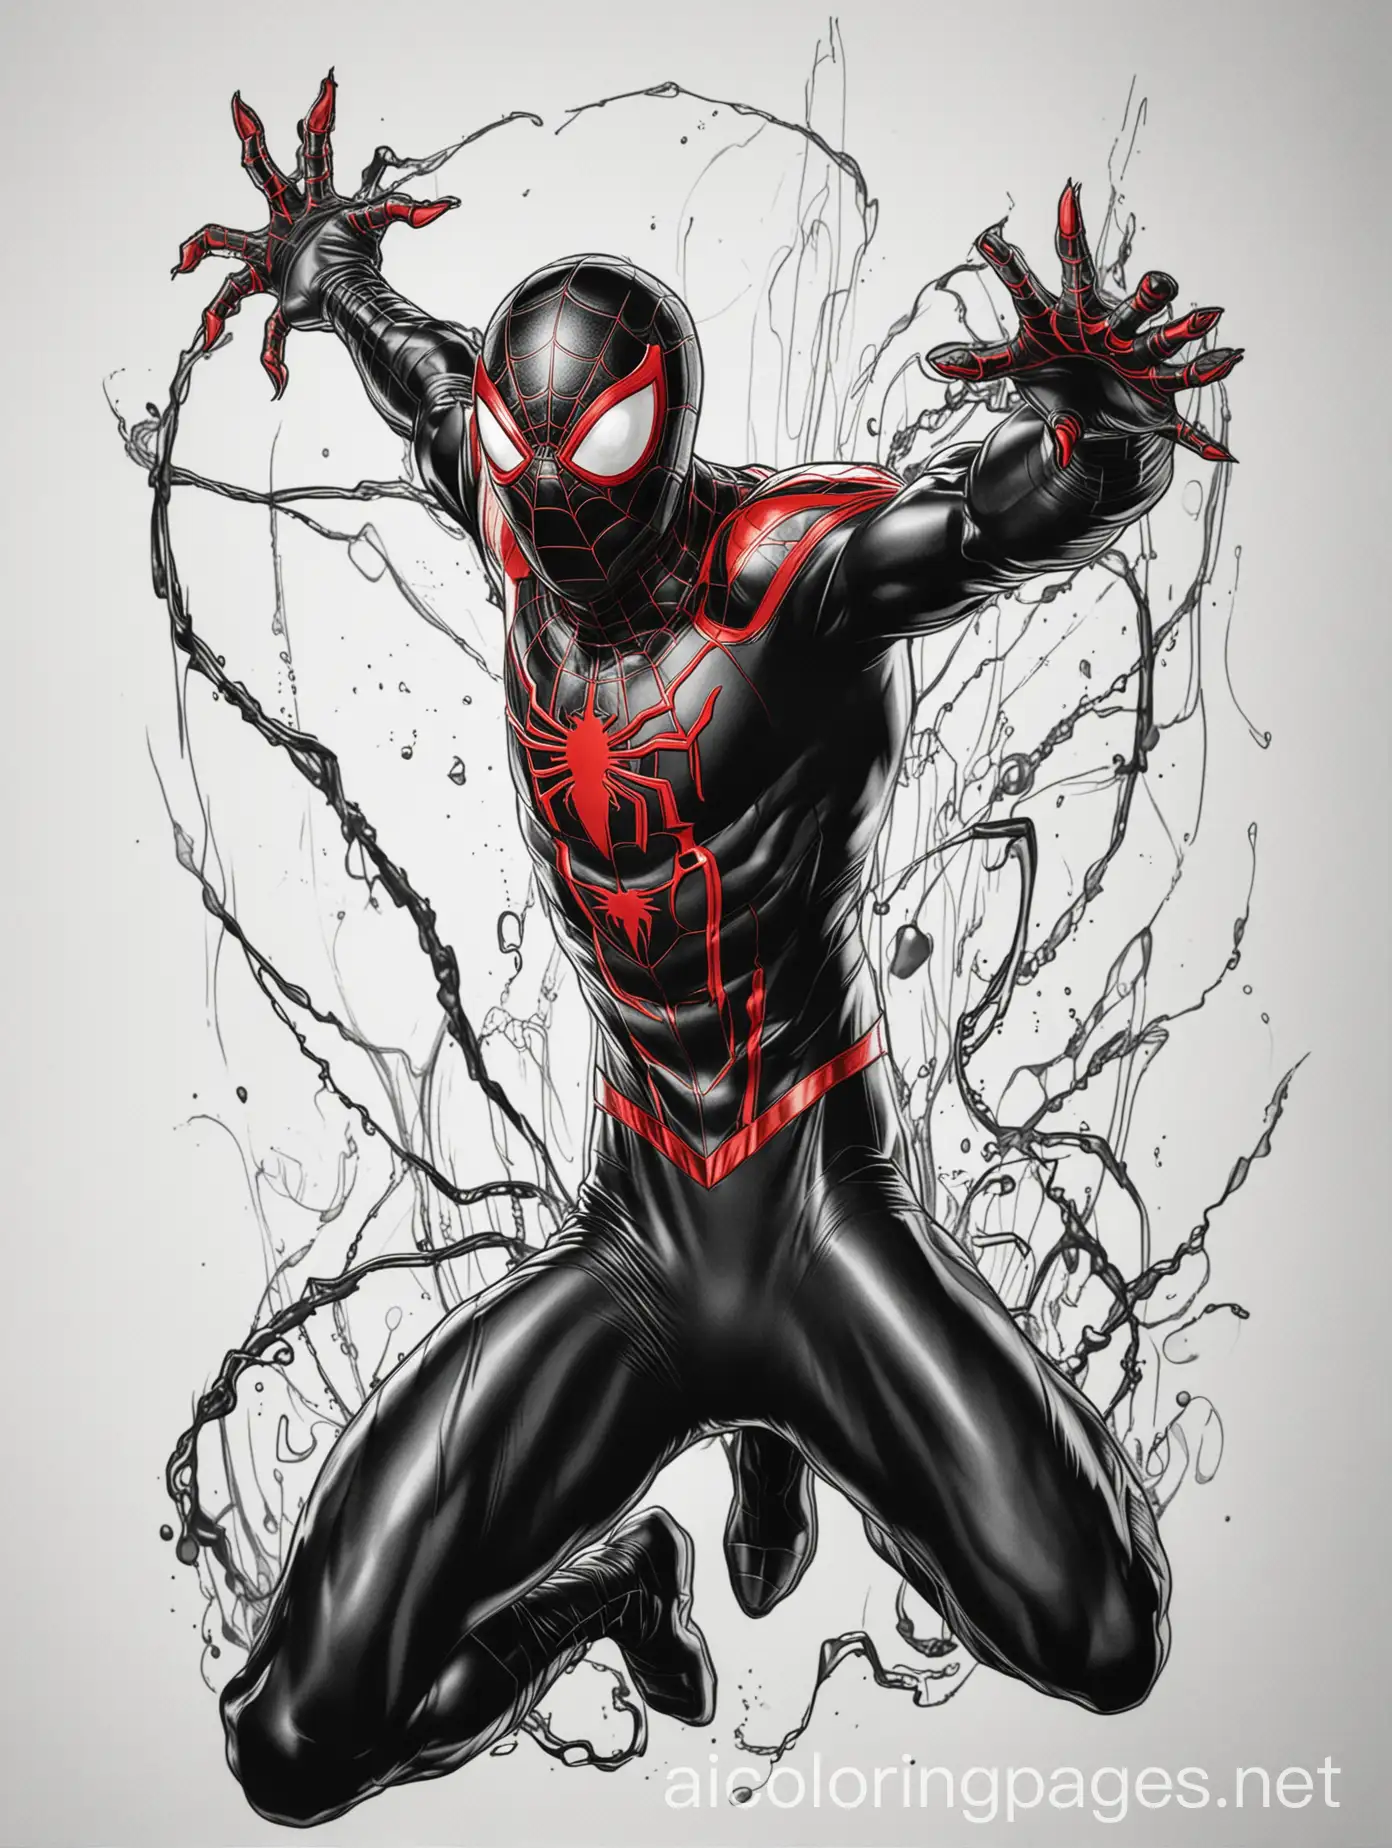 miles Morales fusion carnage, Coloring Page, black and white, line art, white background, Simplicity, Ample White Space. The background of the coloring page is plain white to make it easy for young children to color within the lines. The outlines of all the subjects are easy to distinguish, making it simple for kids to color without too much difficulty